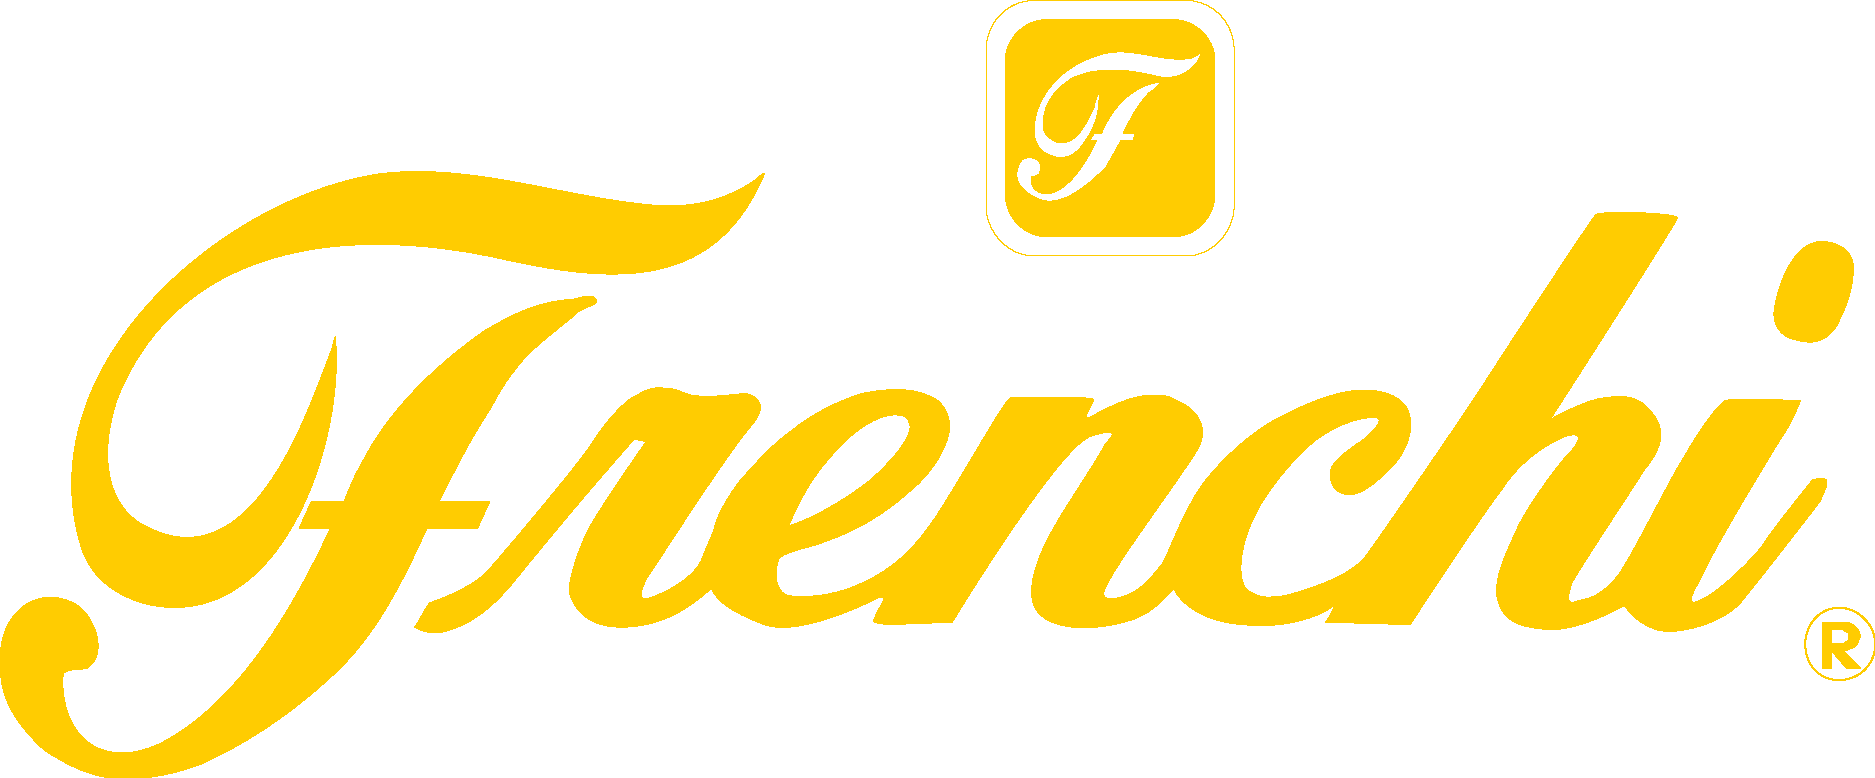 Frenchi Products Logo Vector